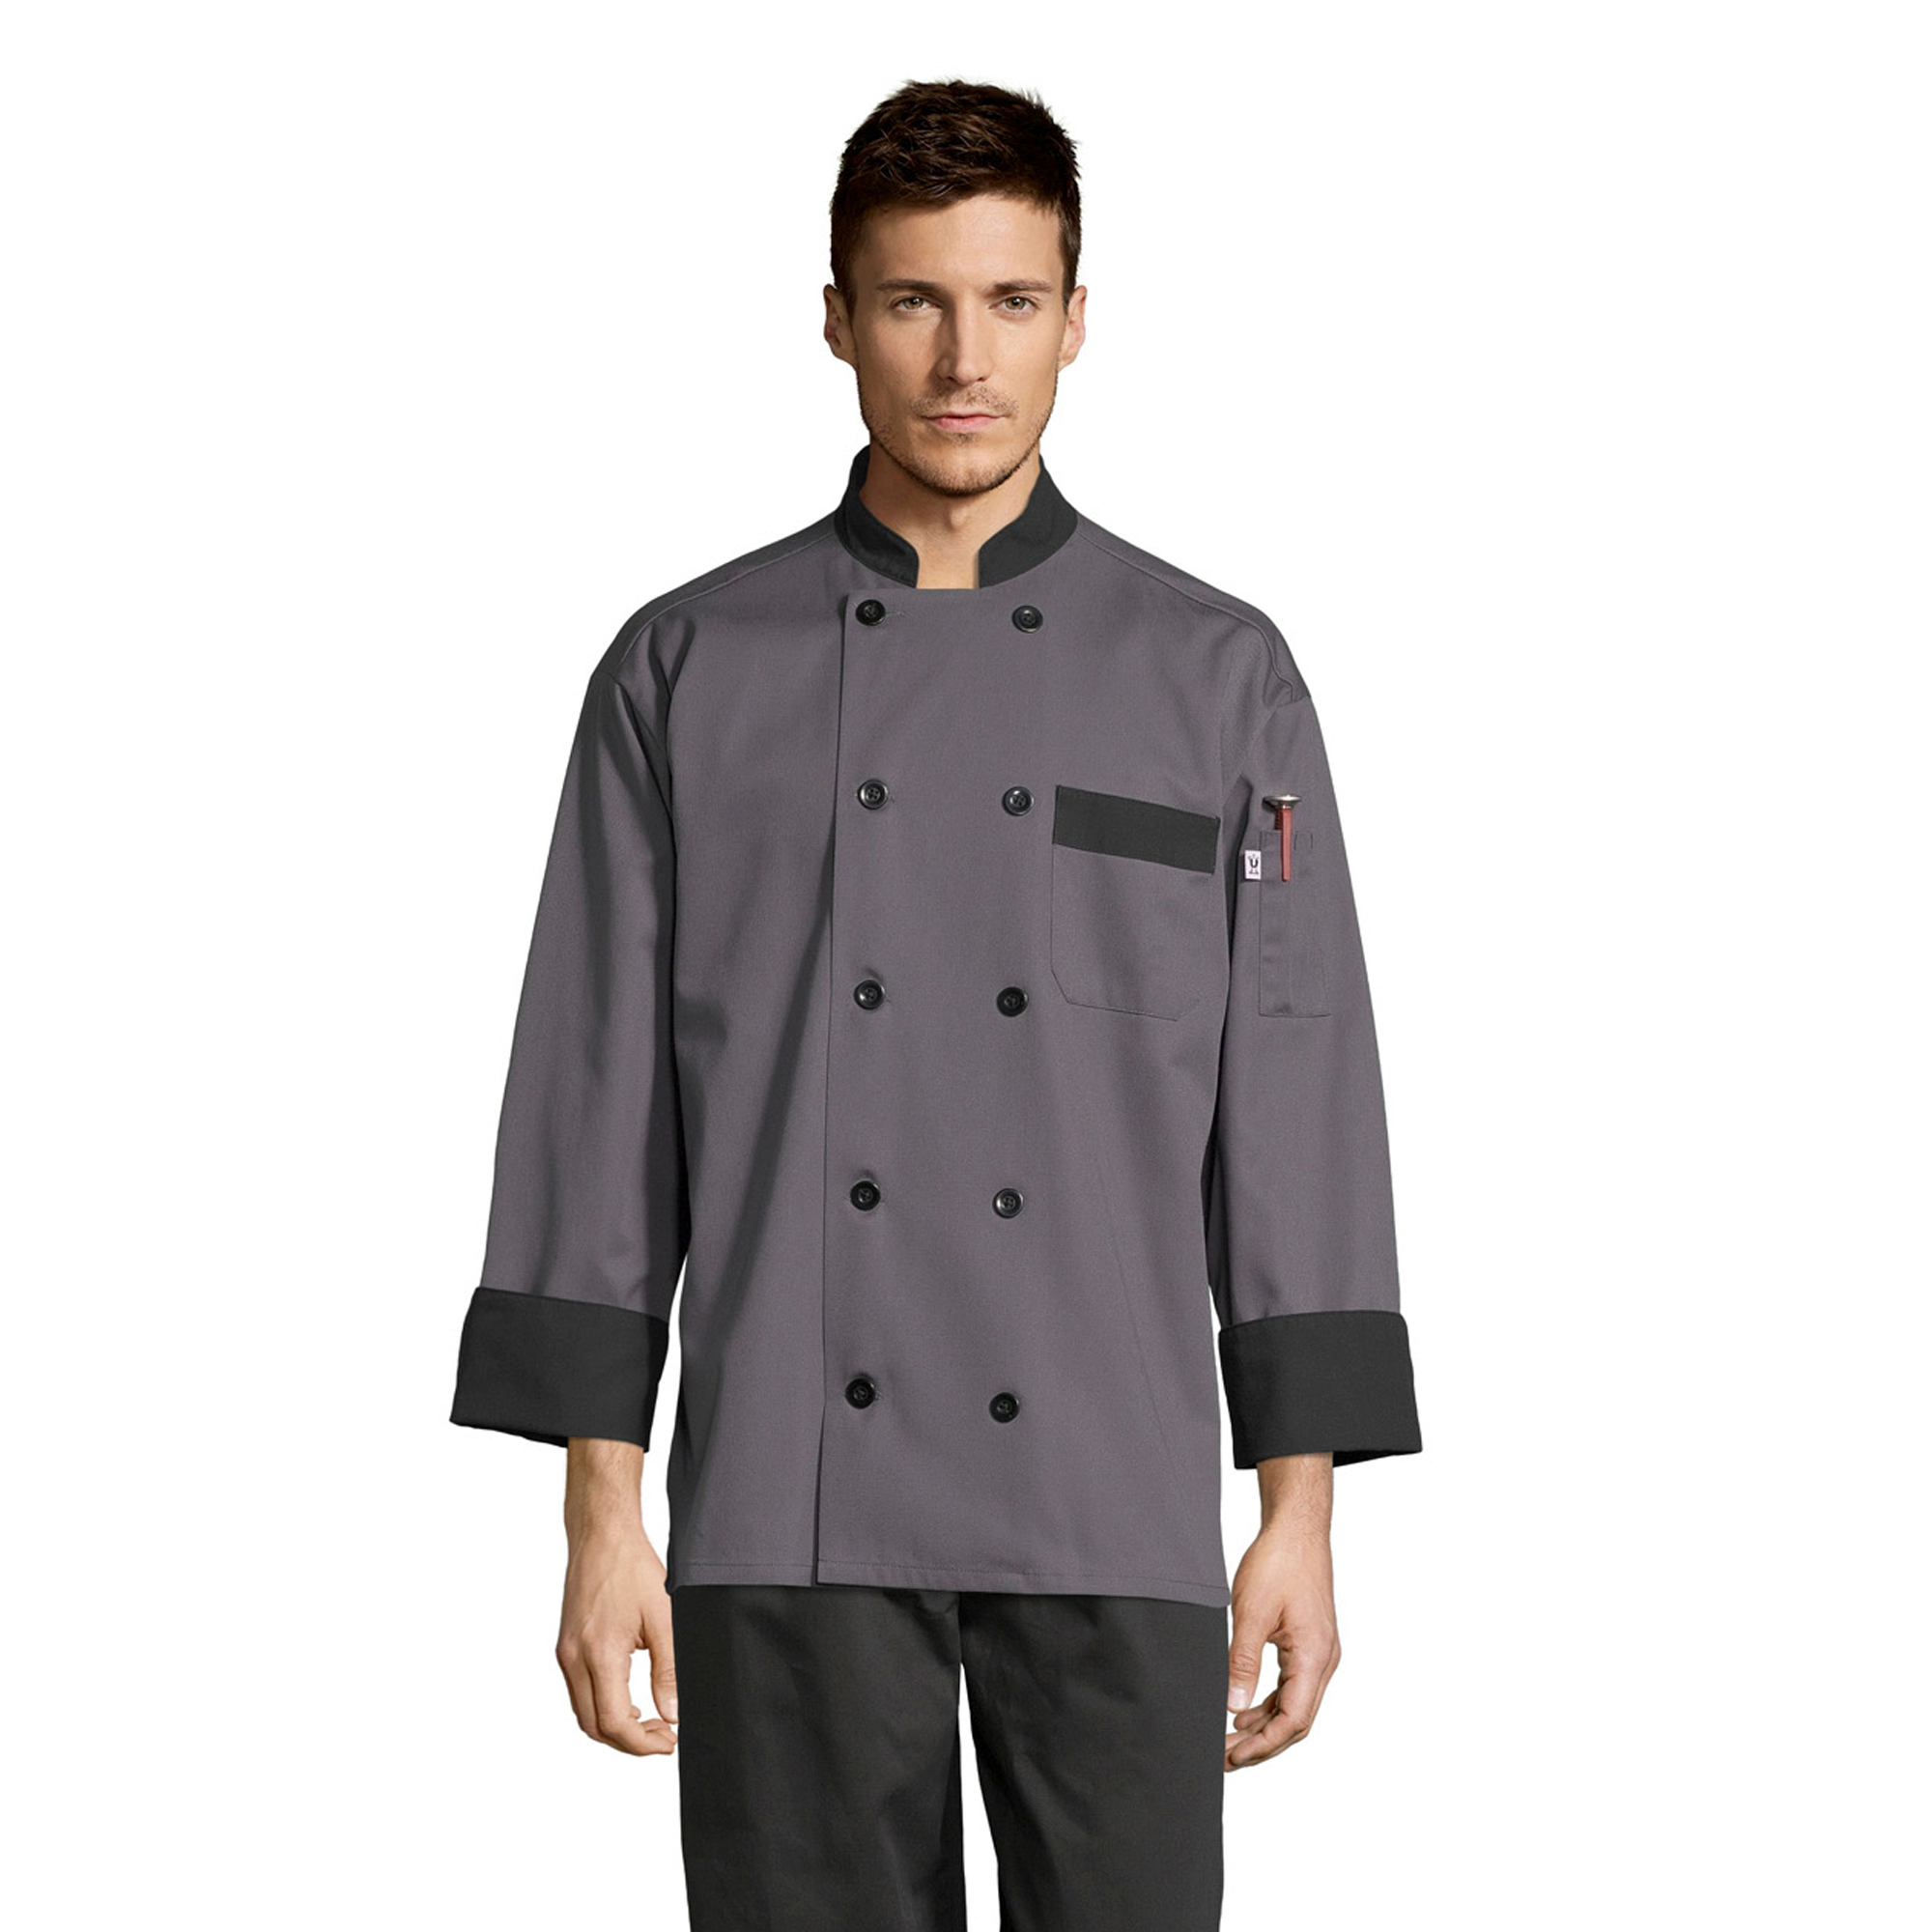 0404 Chef Coat With 10 Black Buttons & Trim